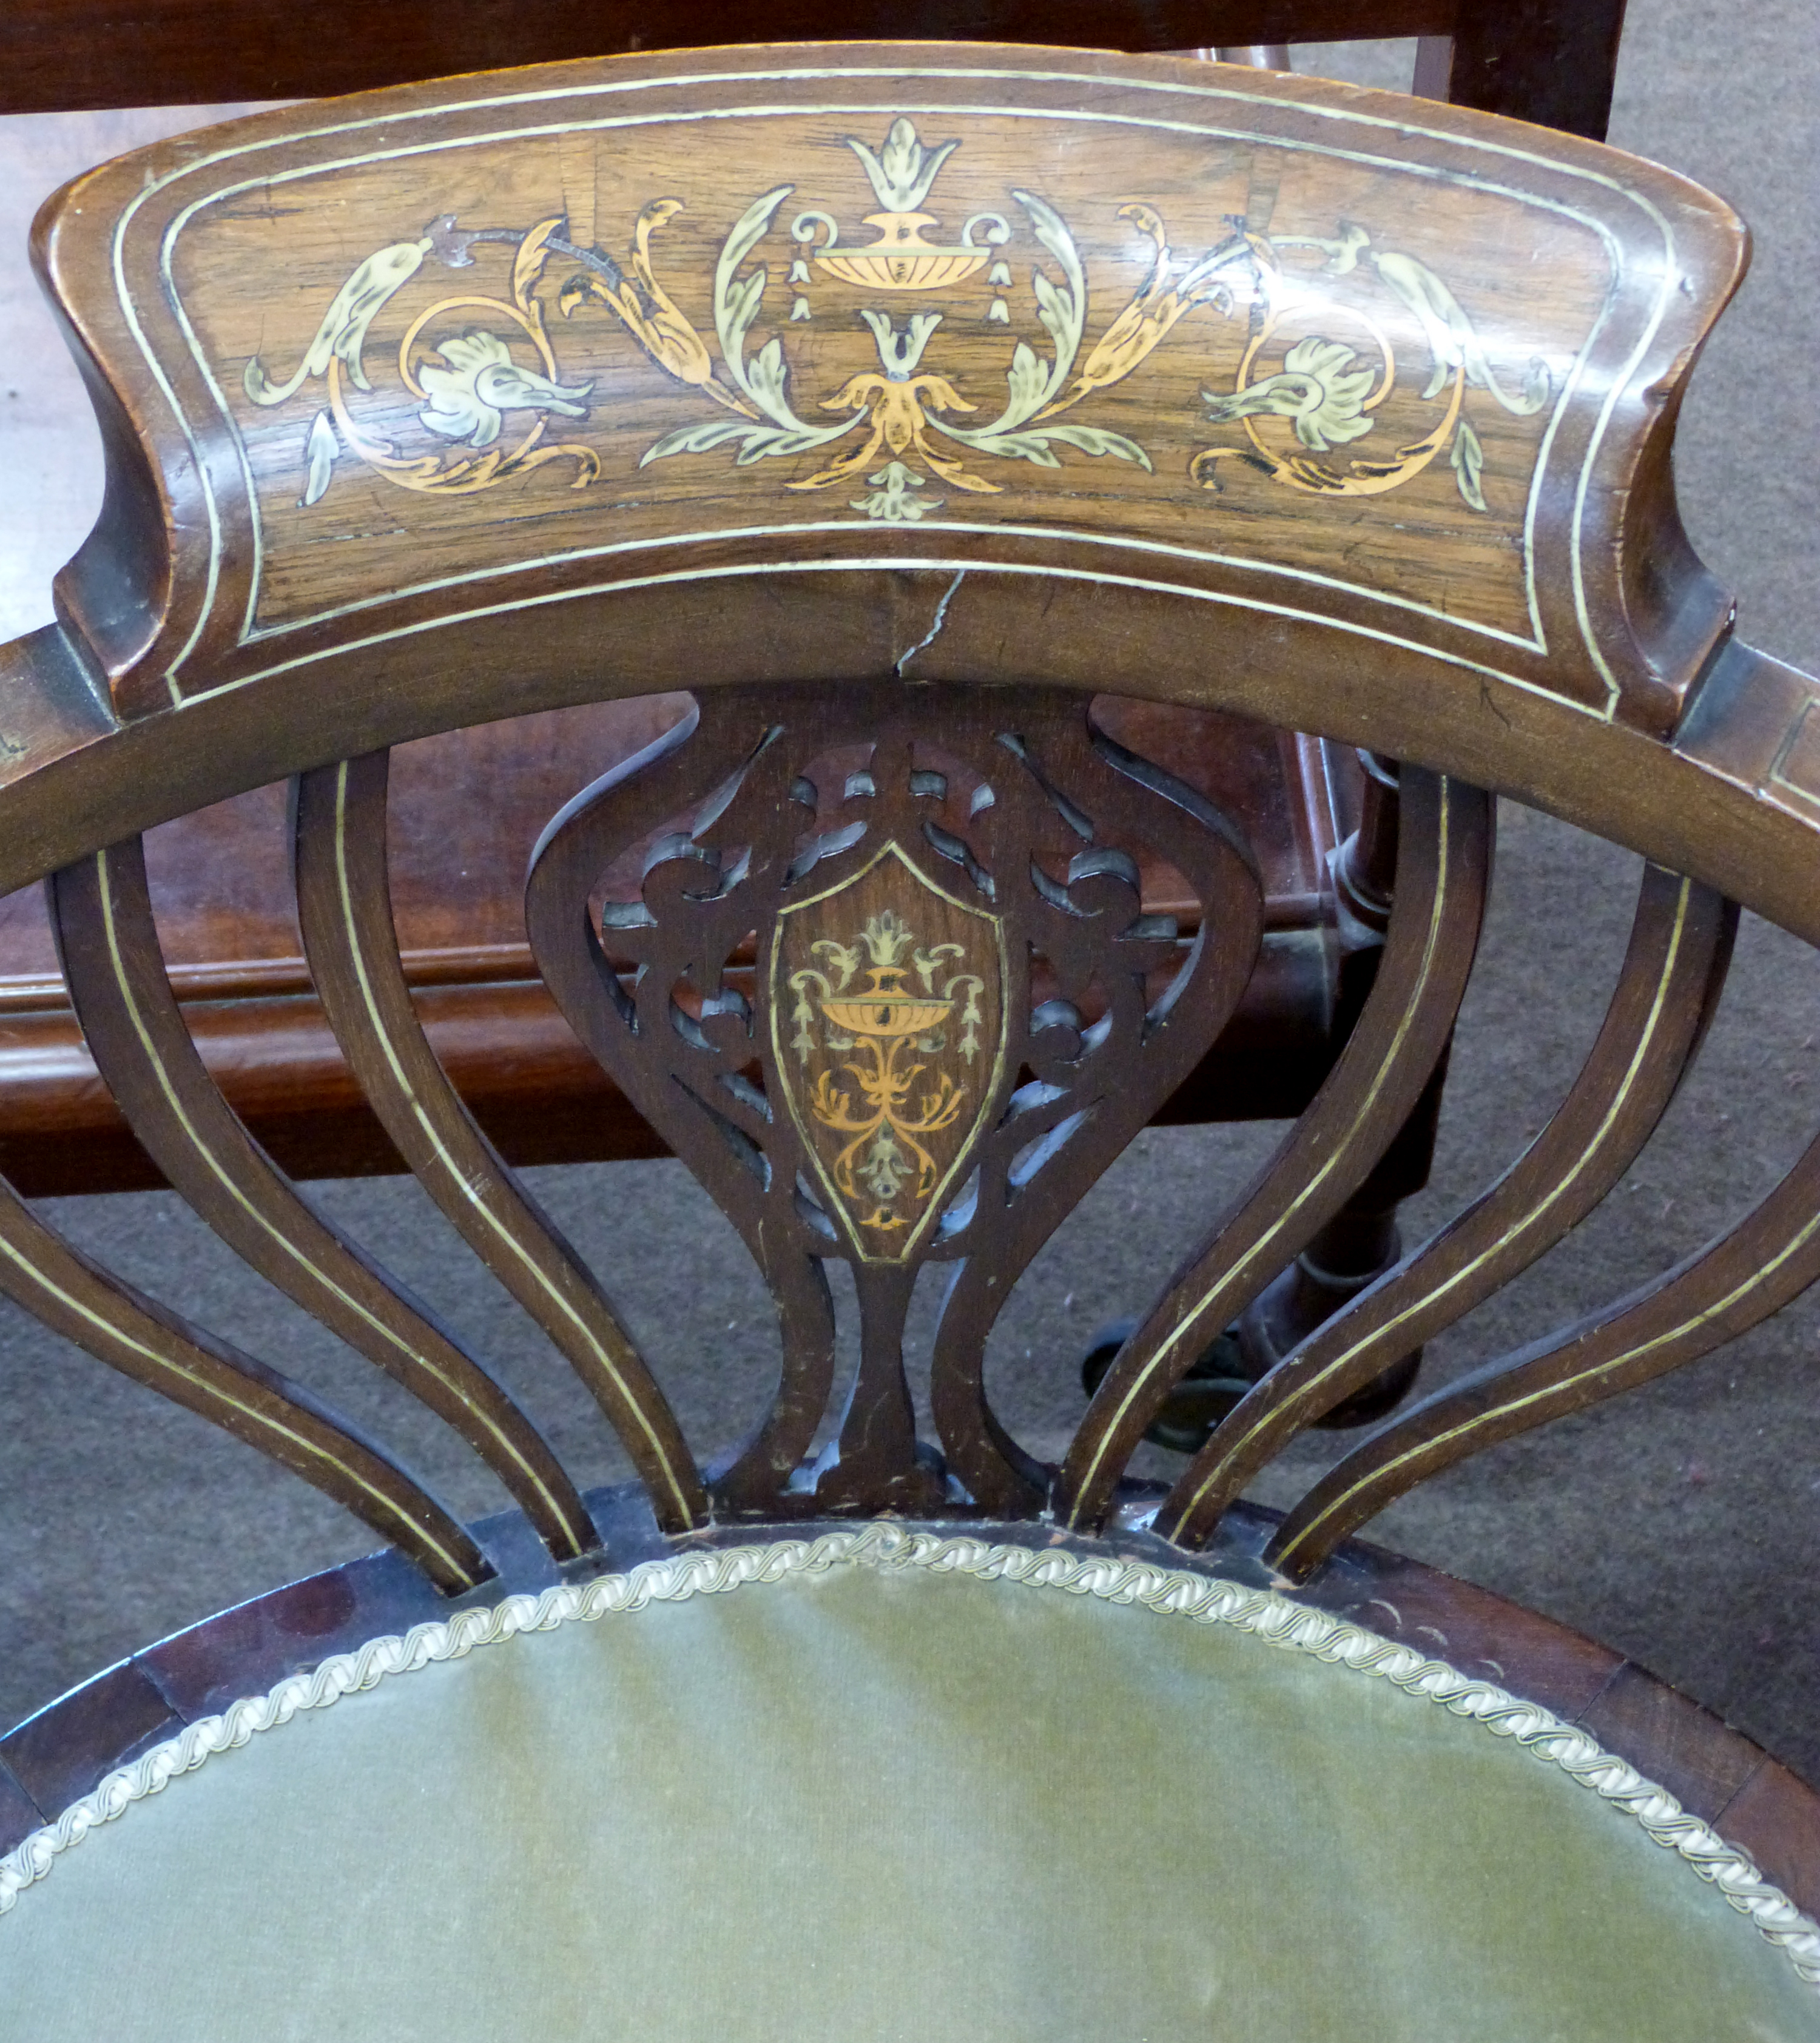 Decorative inlaid armchair with strung decoration, width approx 58cm max - Image 2 of 4